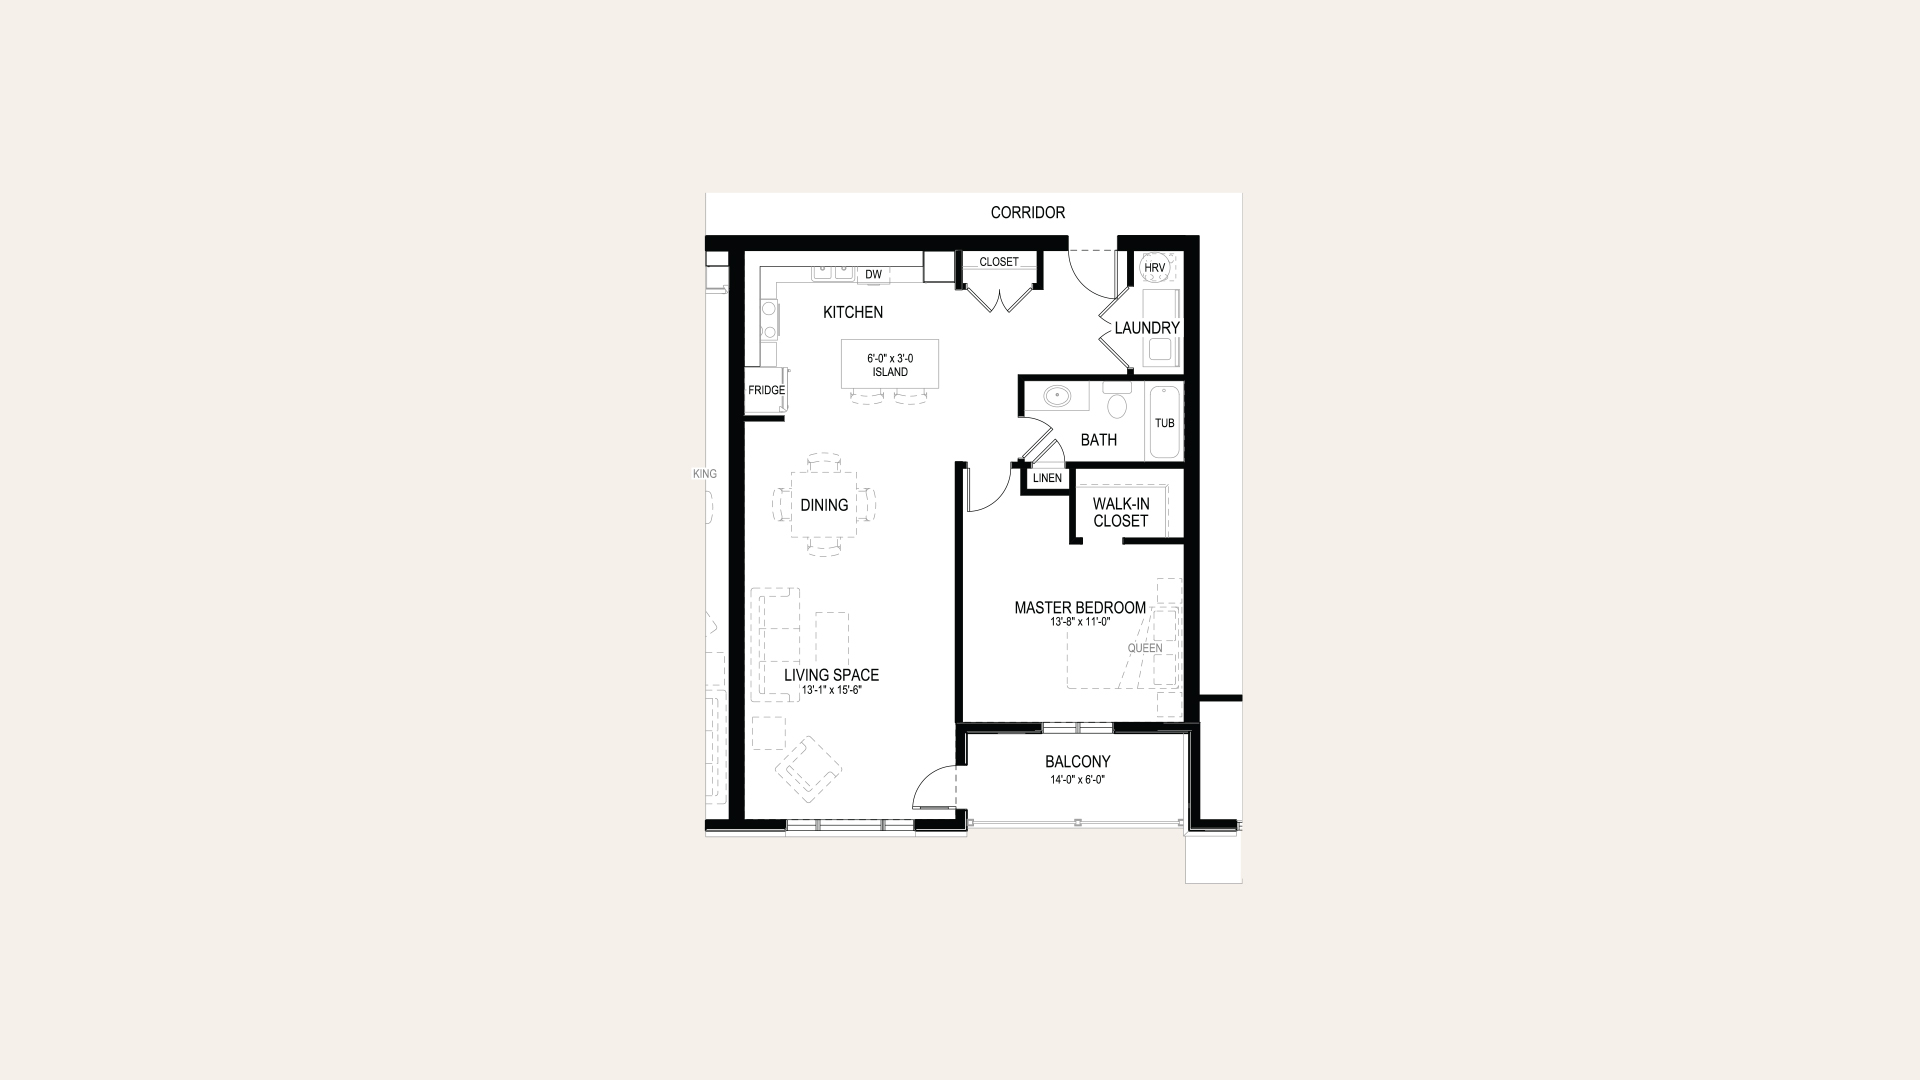 Floor plan of apartment C in Building C. One bedroom with walk-in closet, one bathroom, laundry closet, balcony, and an open concept kitchen and living room.